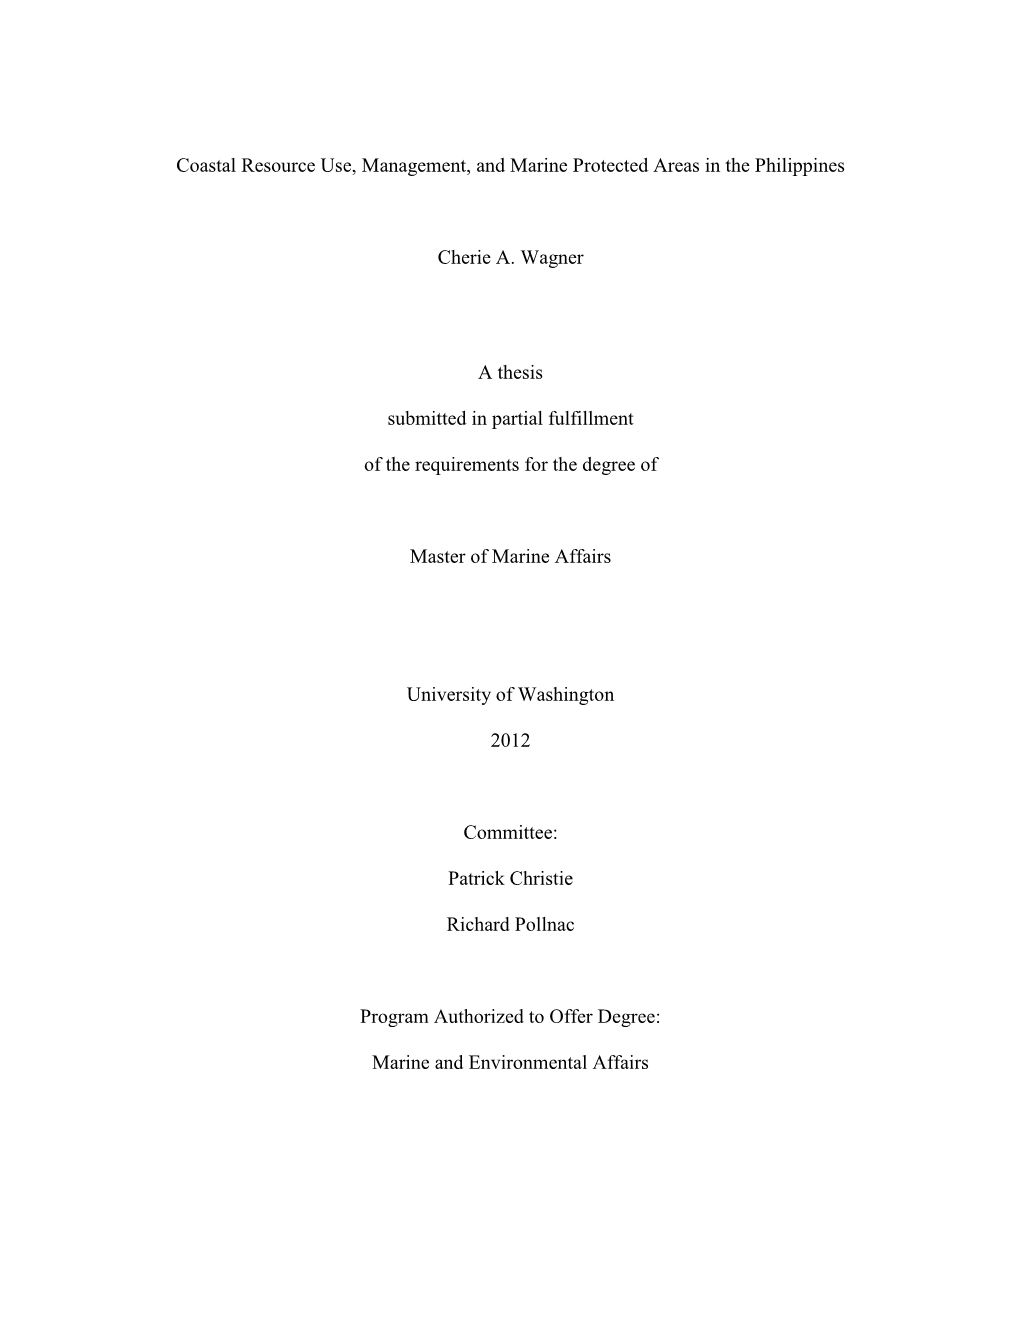 Coastal Resource Use, Management, and Marine Protected Areas in the Philippines